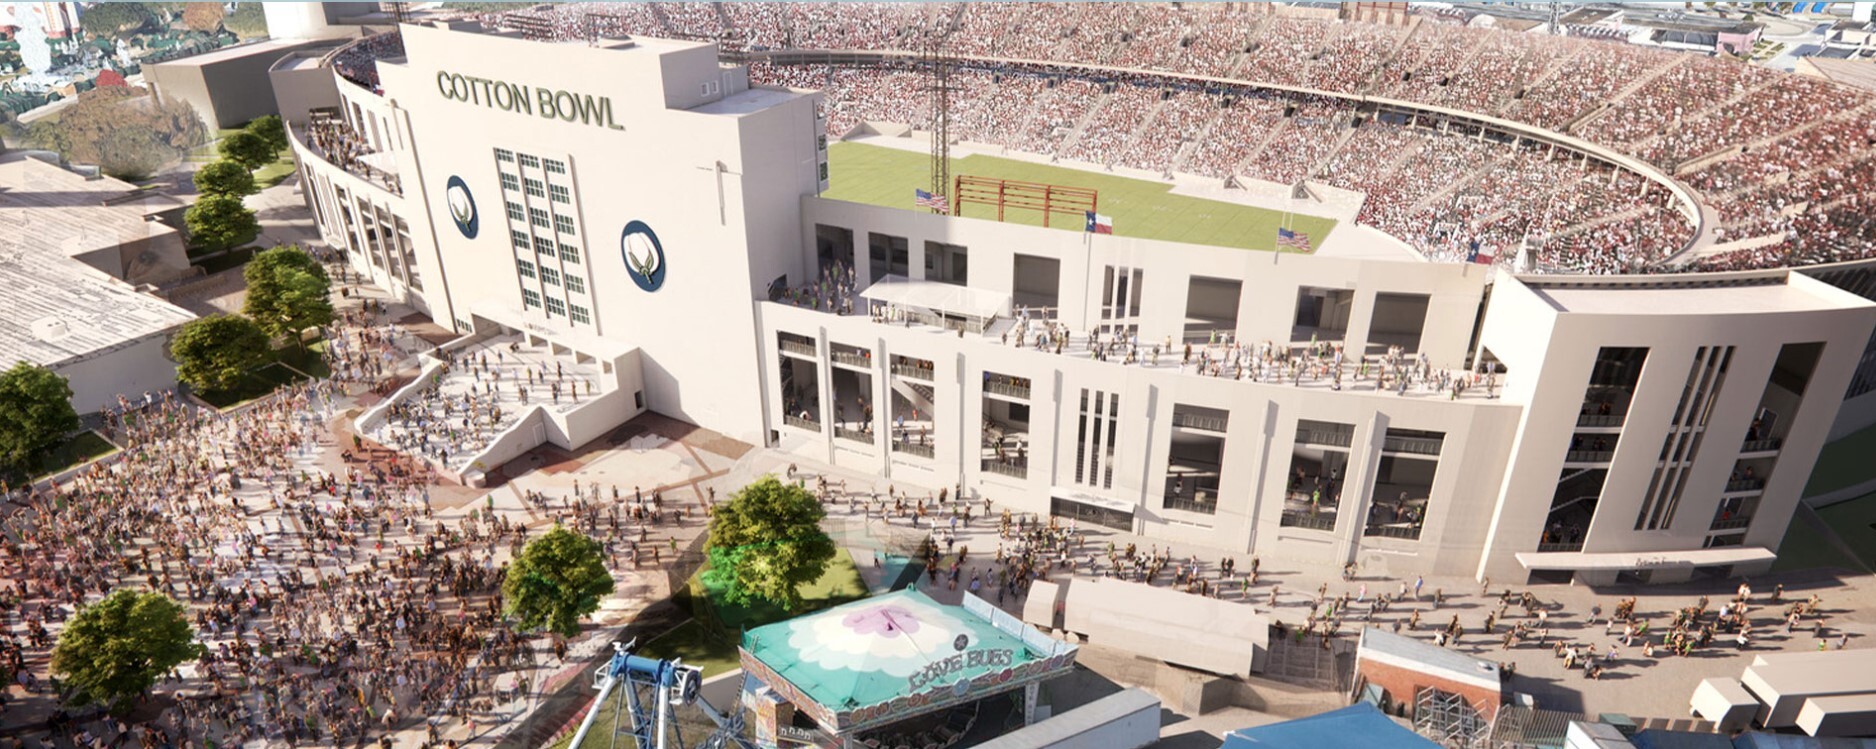 Cotton Bowl Stadium to undergo largest renovation in its 84-years.
What's changing?